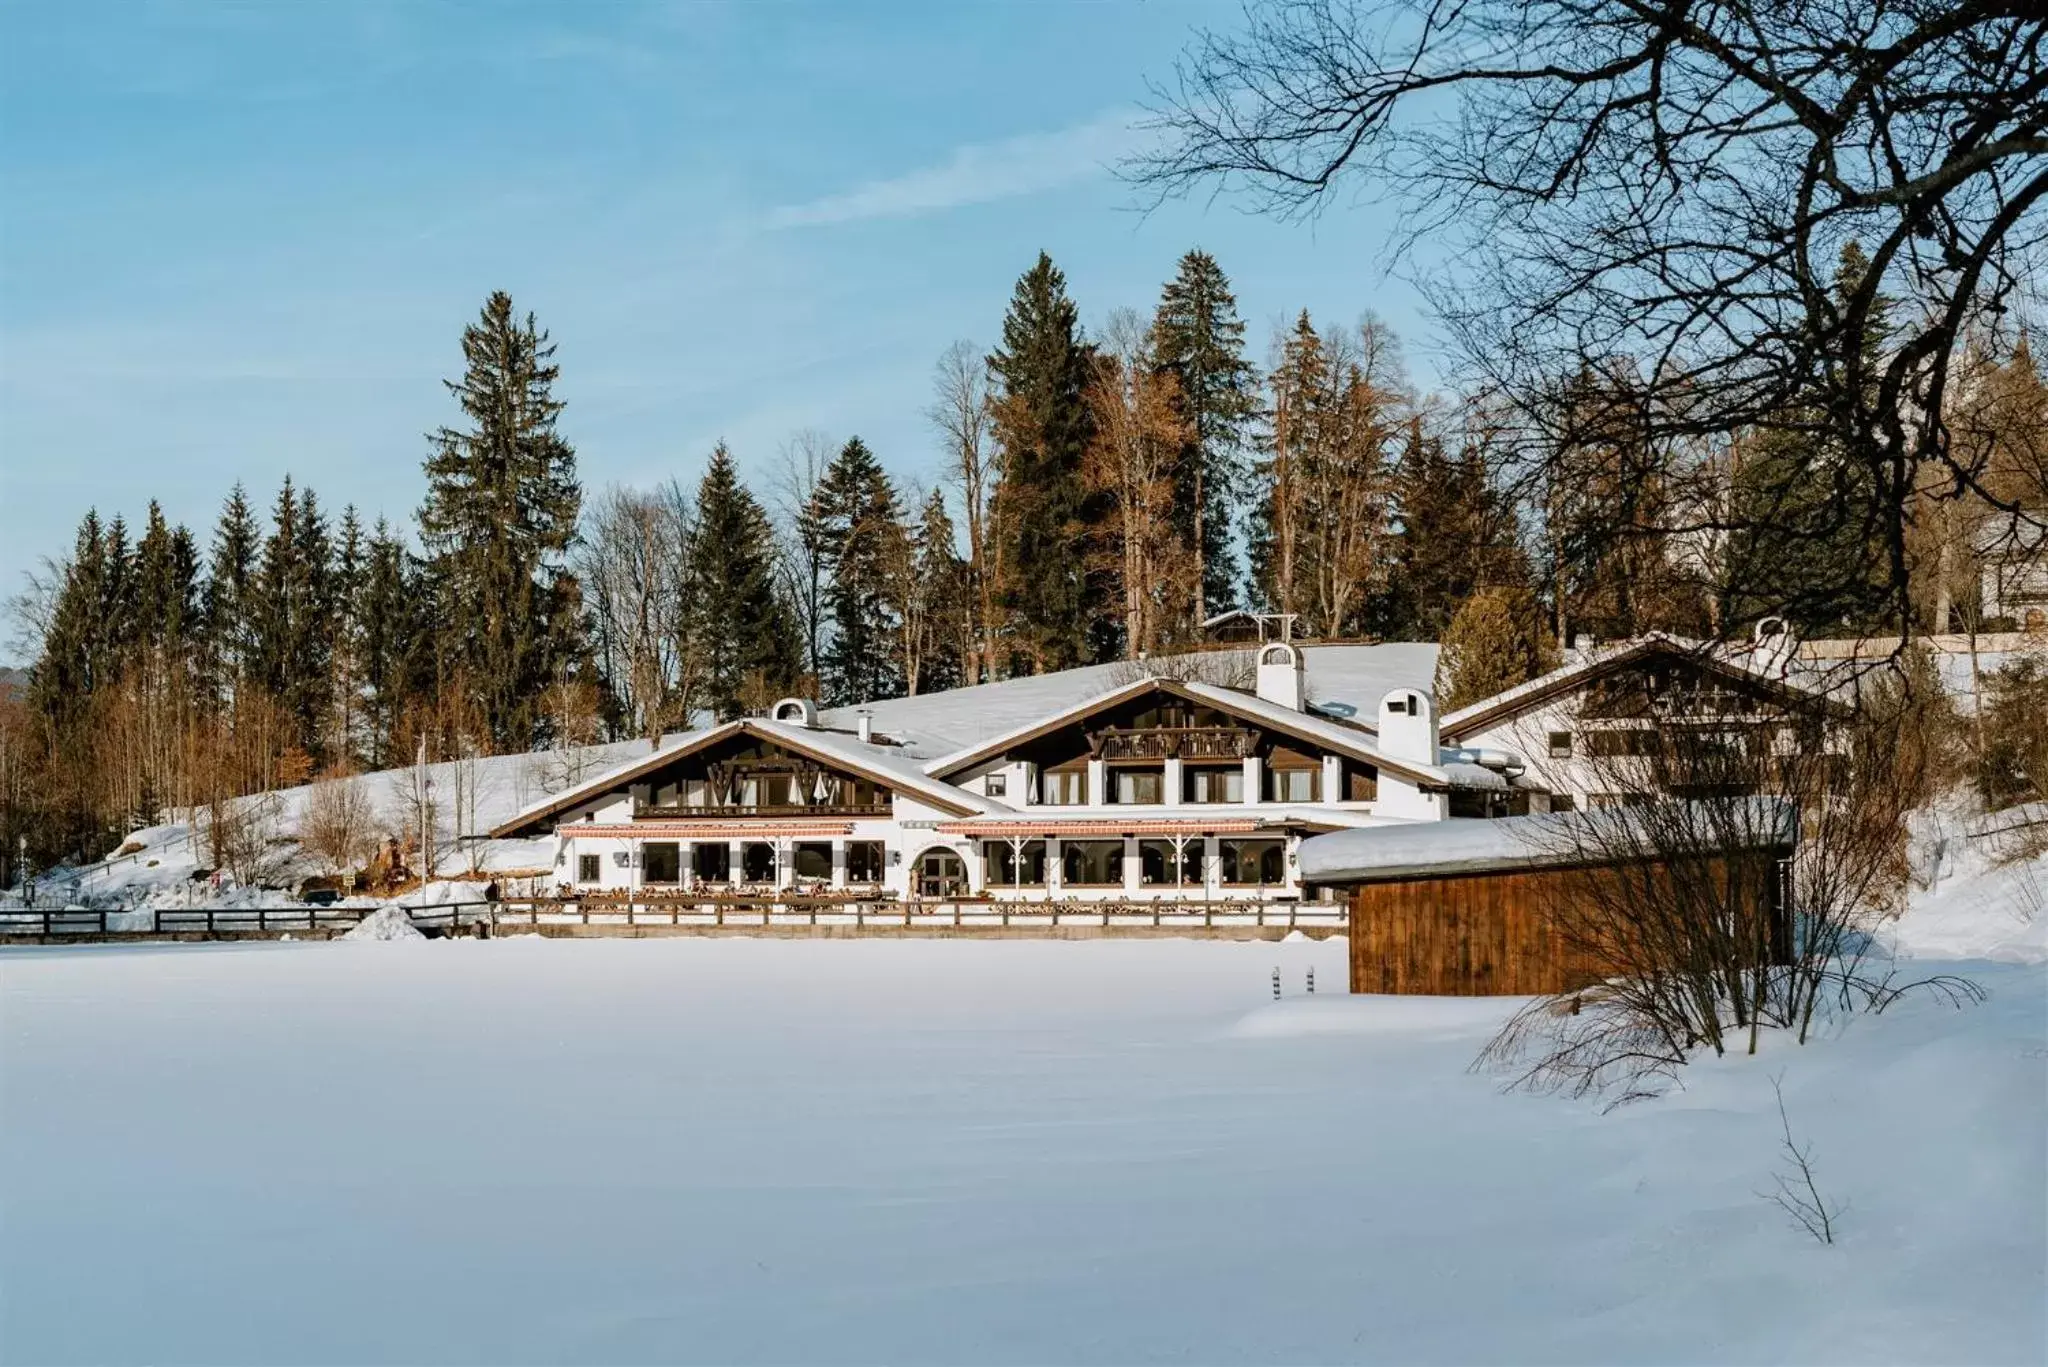 Property building, Winter in Seehaus Riessersee